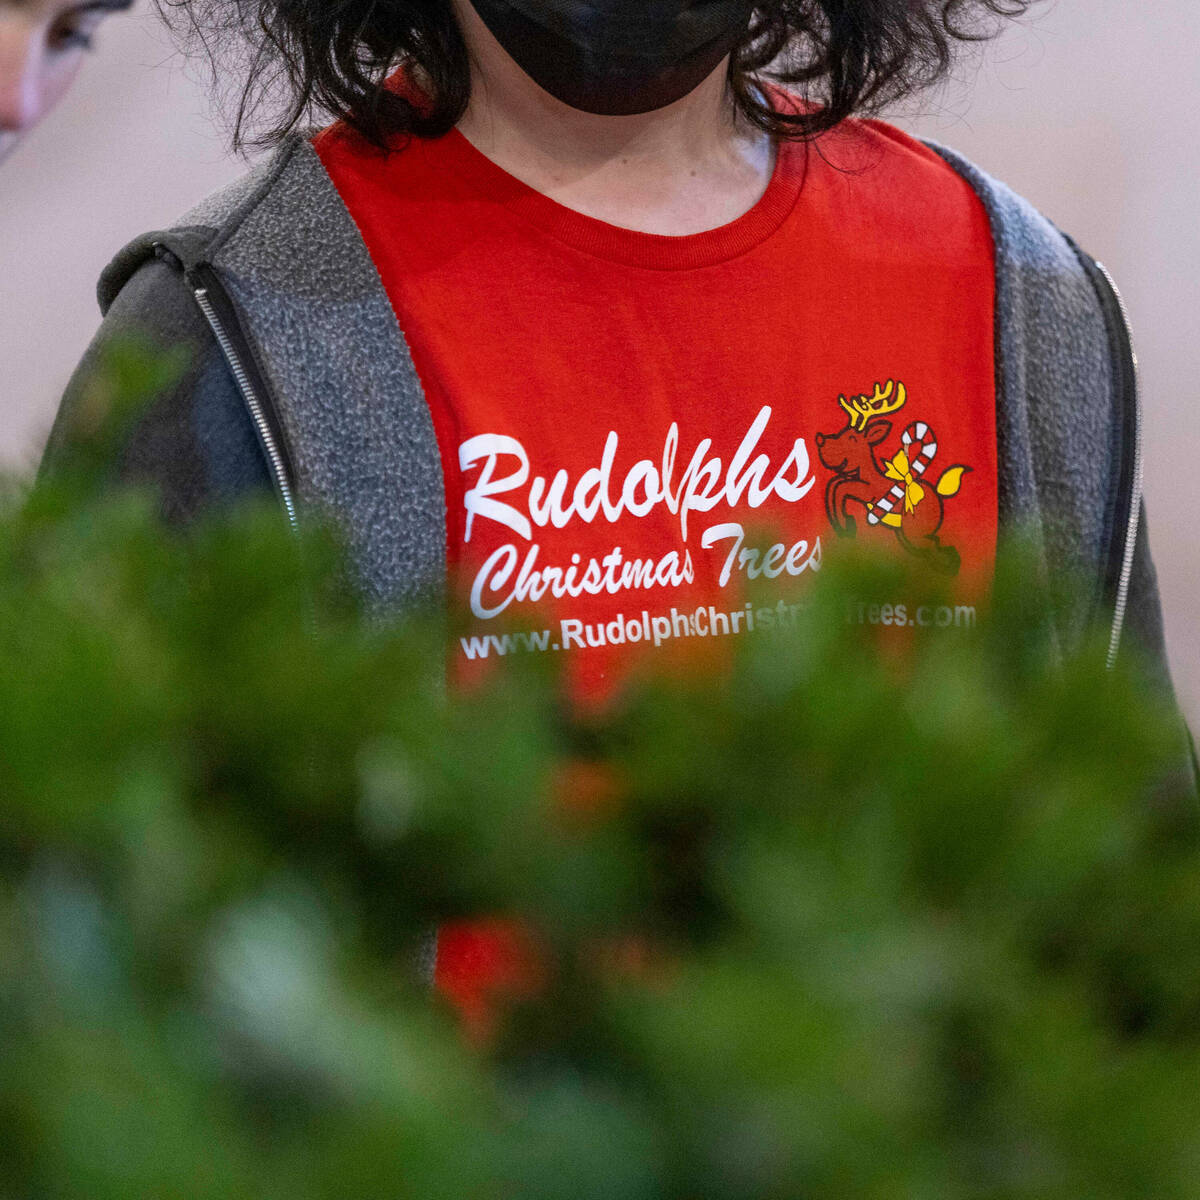 Dylan Zaudke wears a company T-shirt while trimming a tree for purchase at Rudolph's Christmas ...